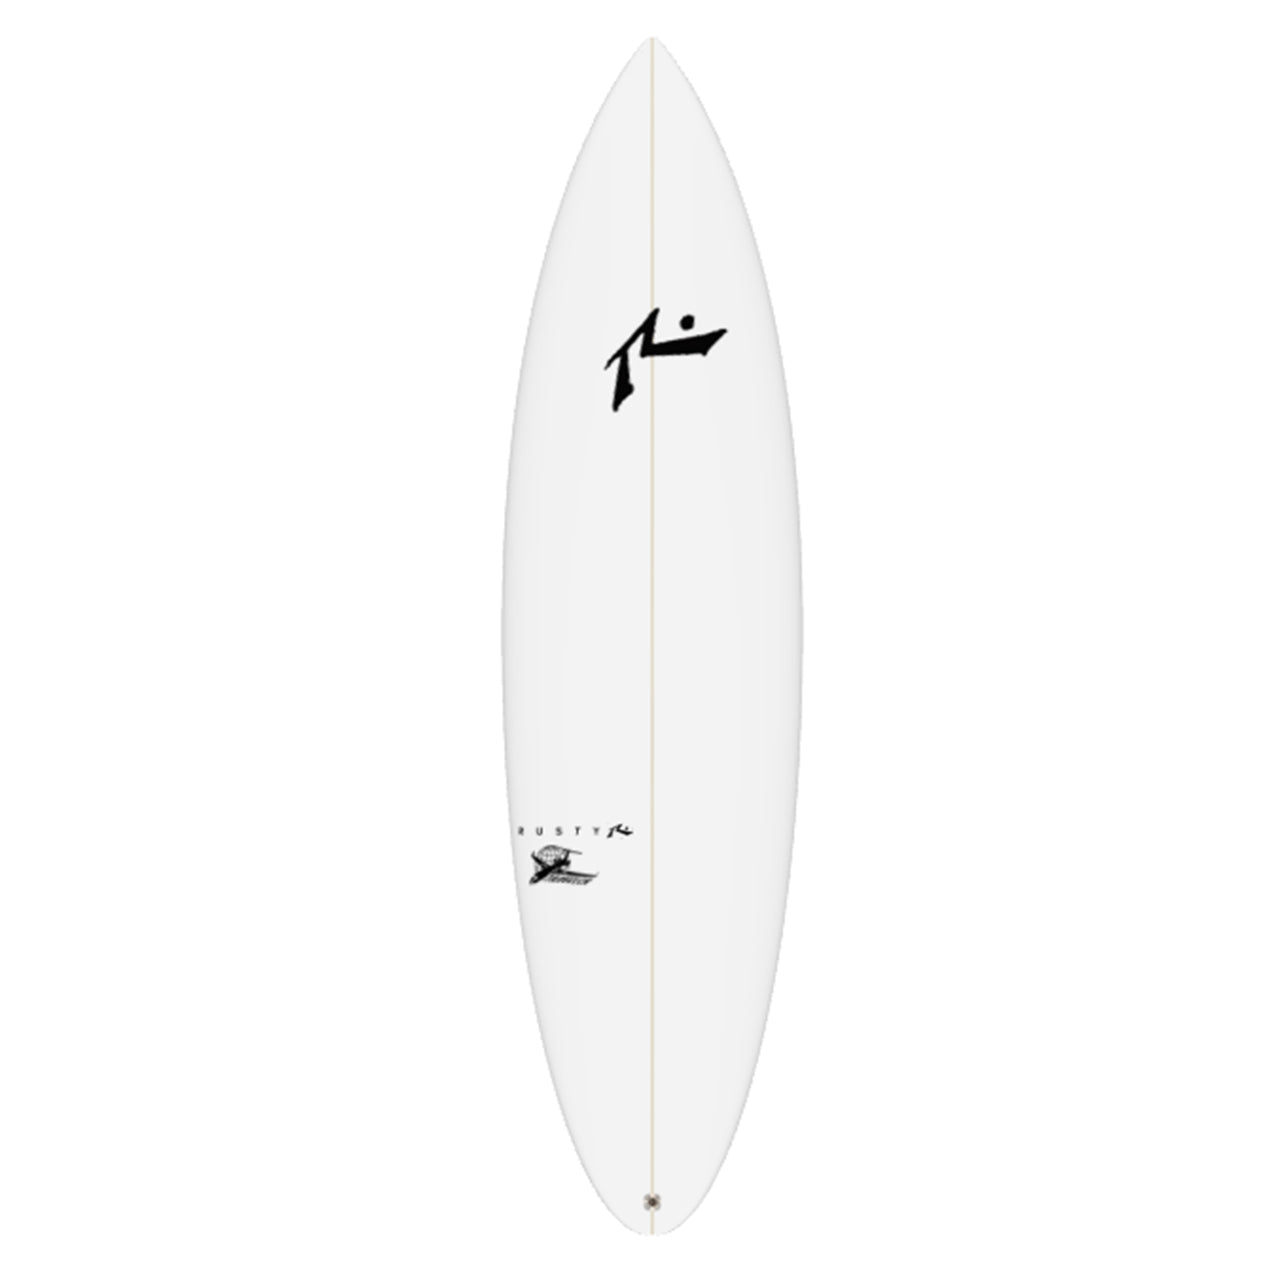 New Traveler - In Stock - Step Up - Rusty Surfboards - Deck View